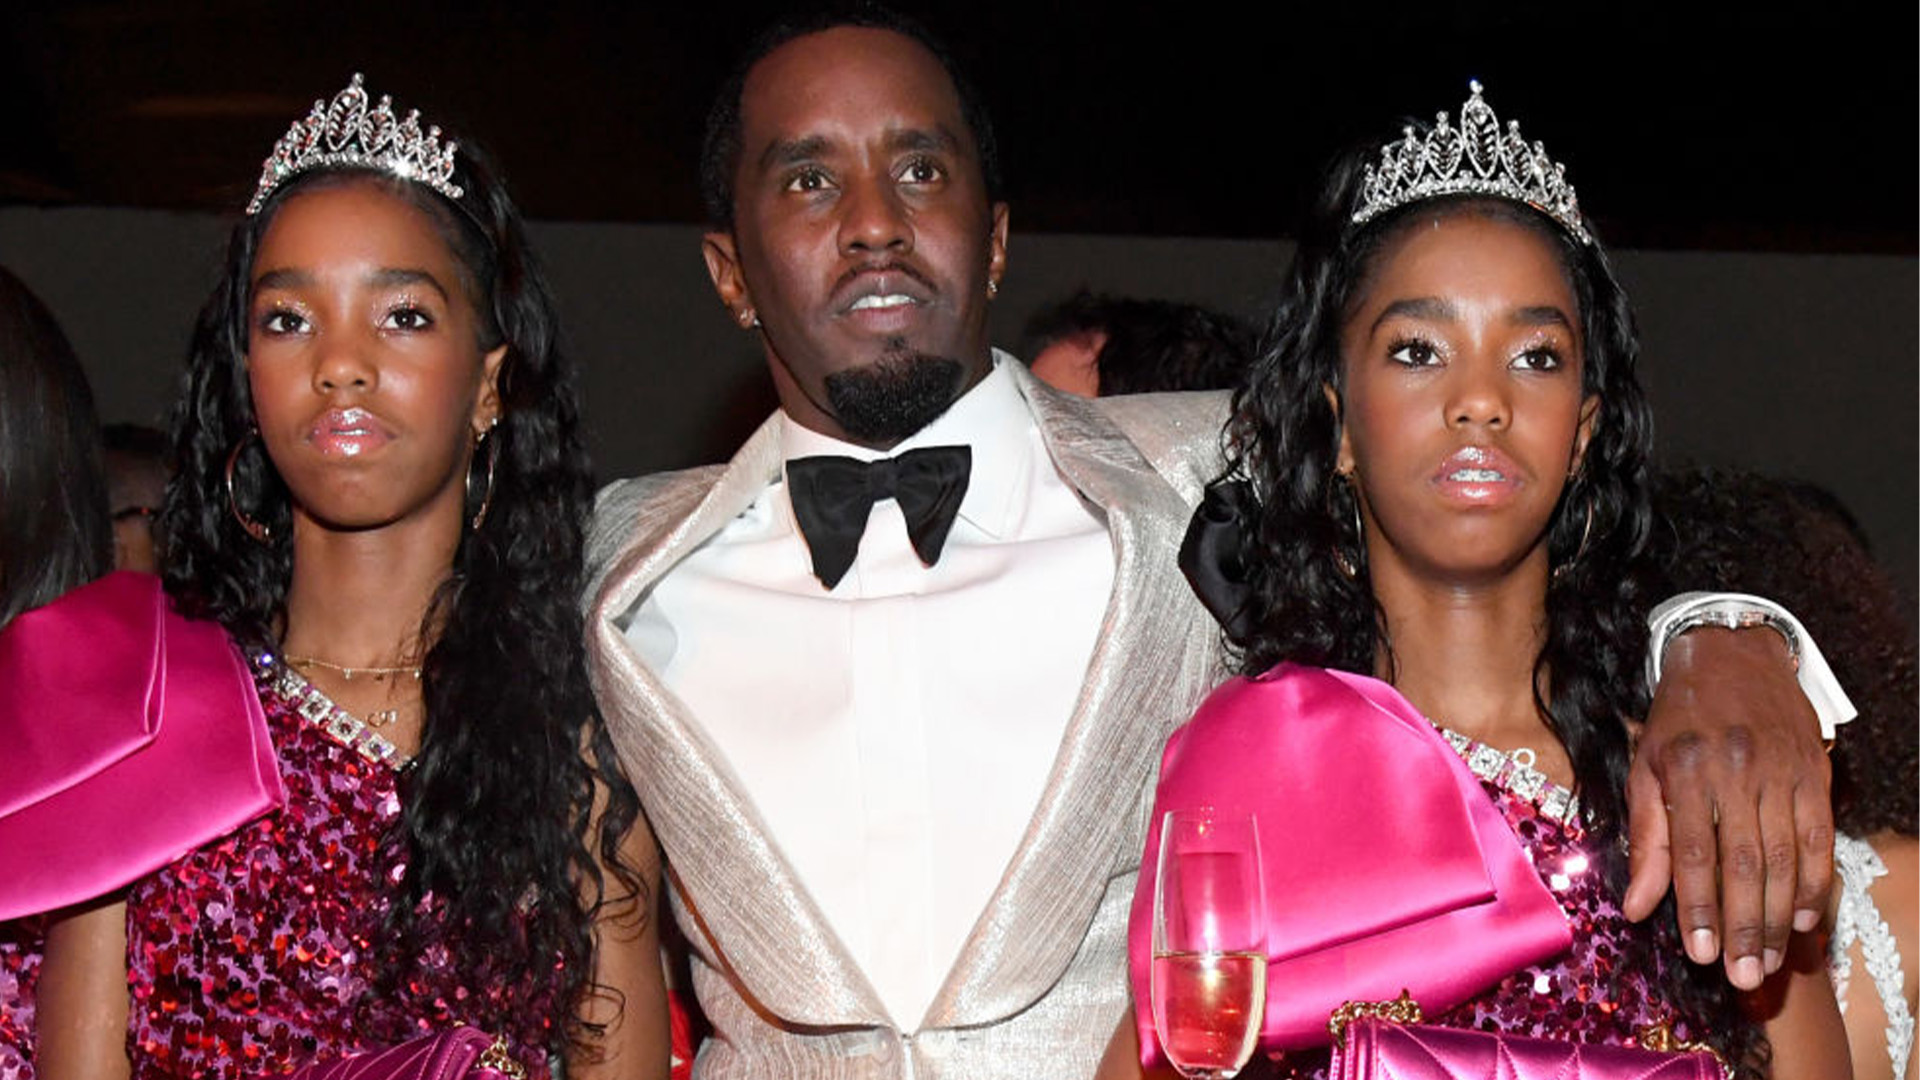 Diddy Was Reportedly Planning a Spring Break Trip to Bahamas with Twin Daughters Prior to Home Raids